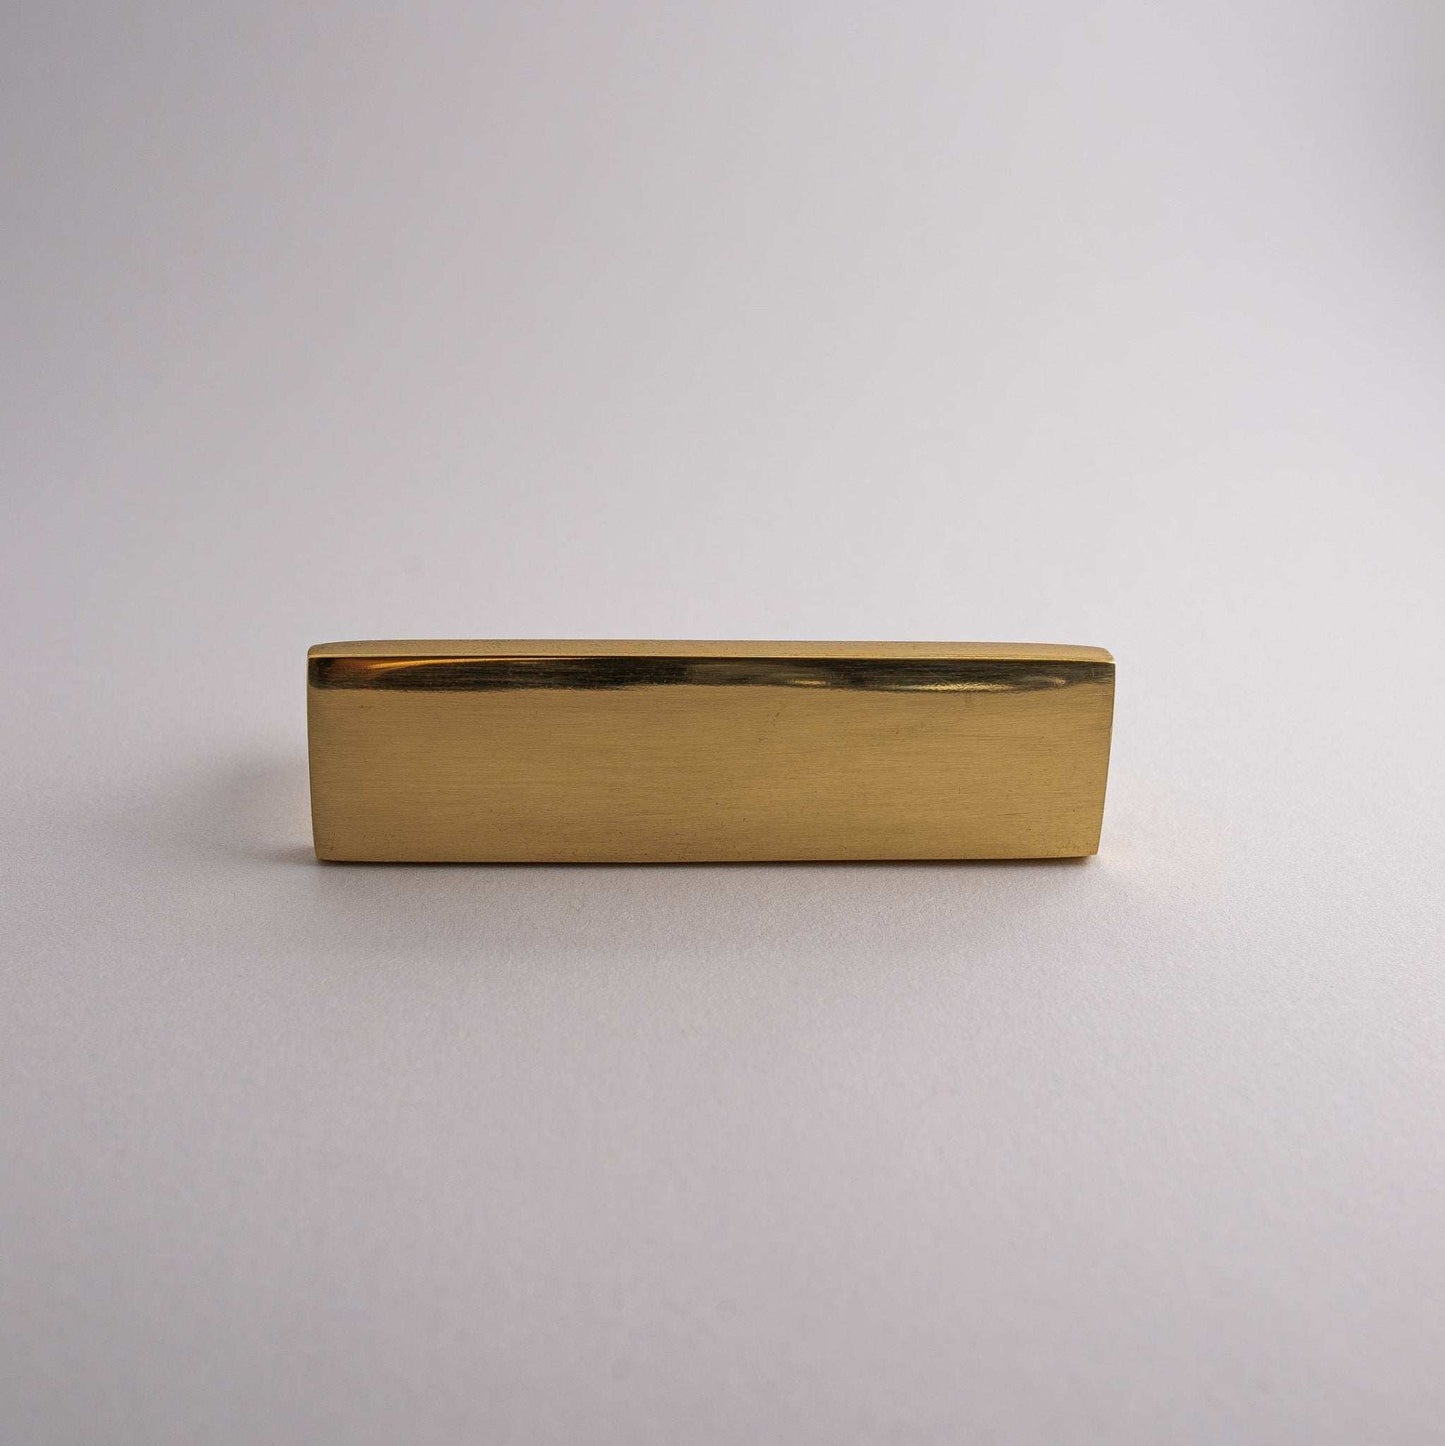 Auburn Pull, Solid Brass Cabinet Pulls
The Auburn Pull is timeless beauty at your fingertips. Crafted from solid brass, these tasteful cabinet pulls are ideal for adding subtle elegance to your home. WitpullAuburn Pull, Solid Brass Cabinet Pulls